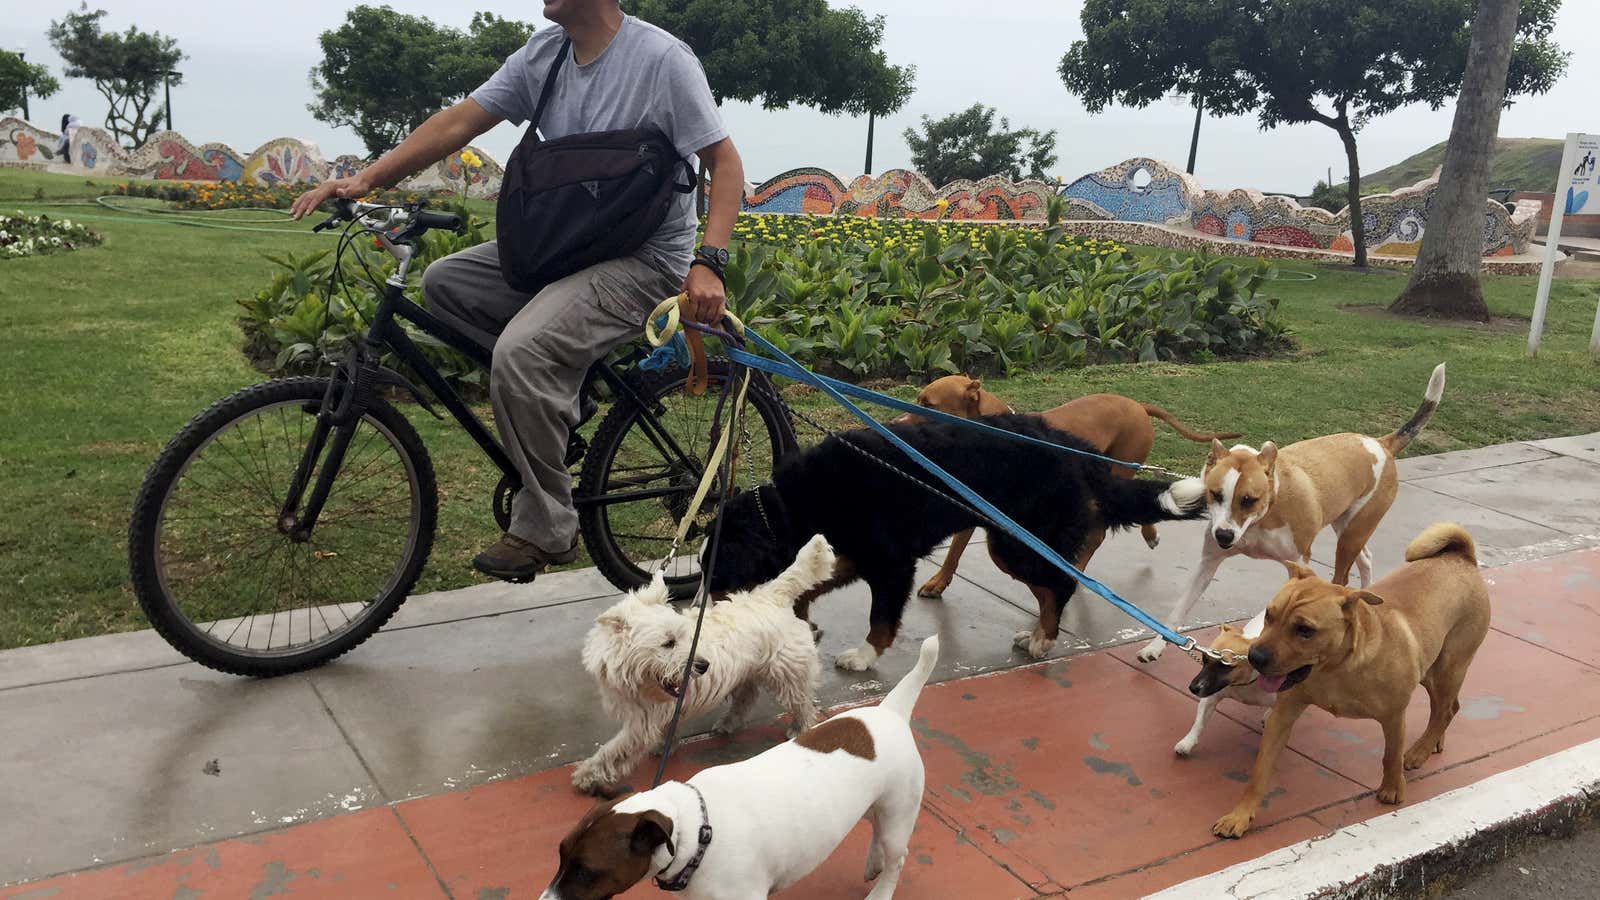 A dog-walker takes dogs out for a walk in a street in Lima’s Miraflores district, July 20, 2015. REUTERS/Mariana Bazo – GF10000165190